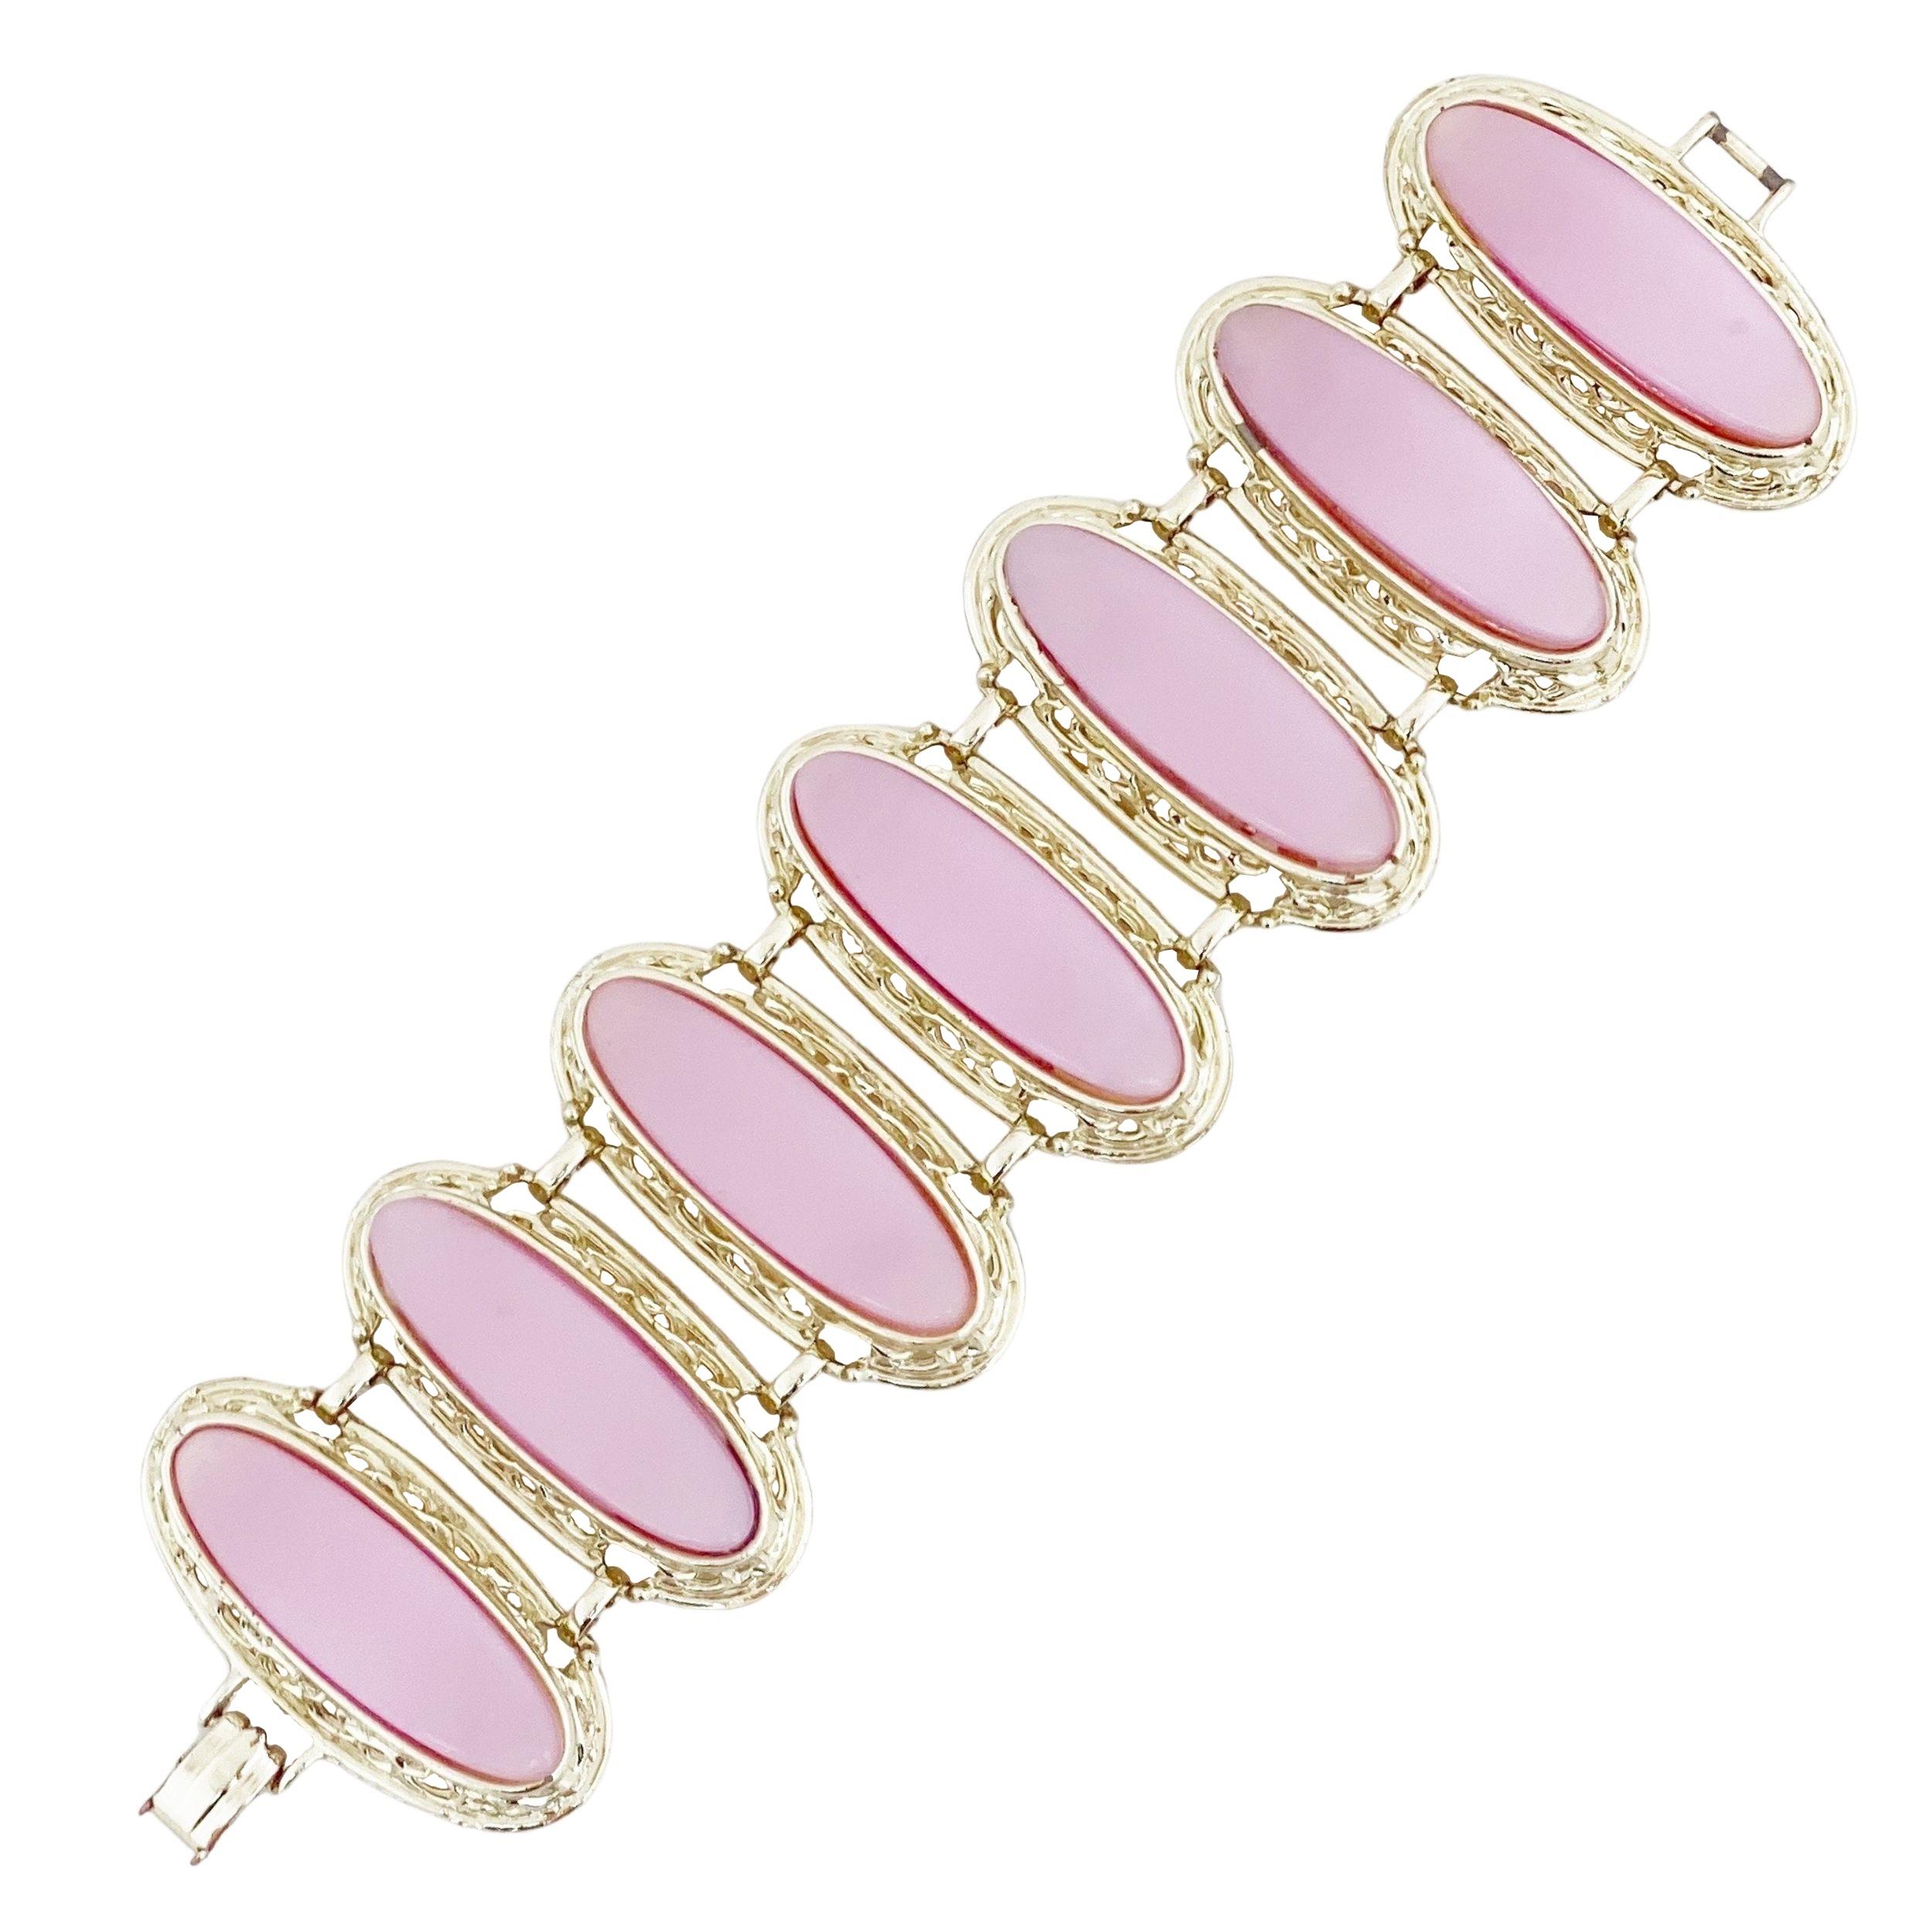 Dusty Pink Moonglow Thermoset Oversized Panel Bracelet, 1950s